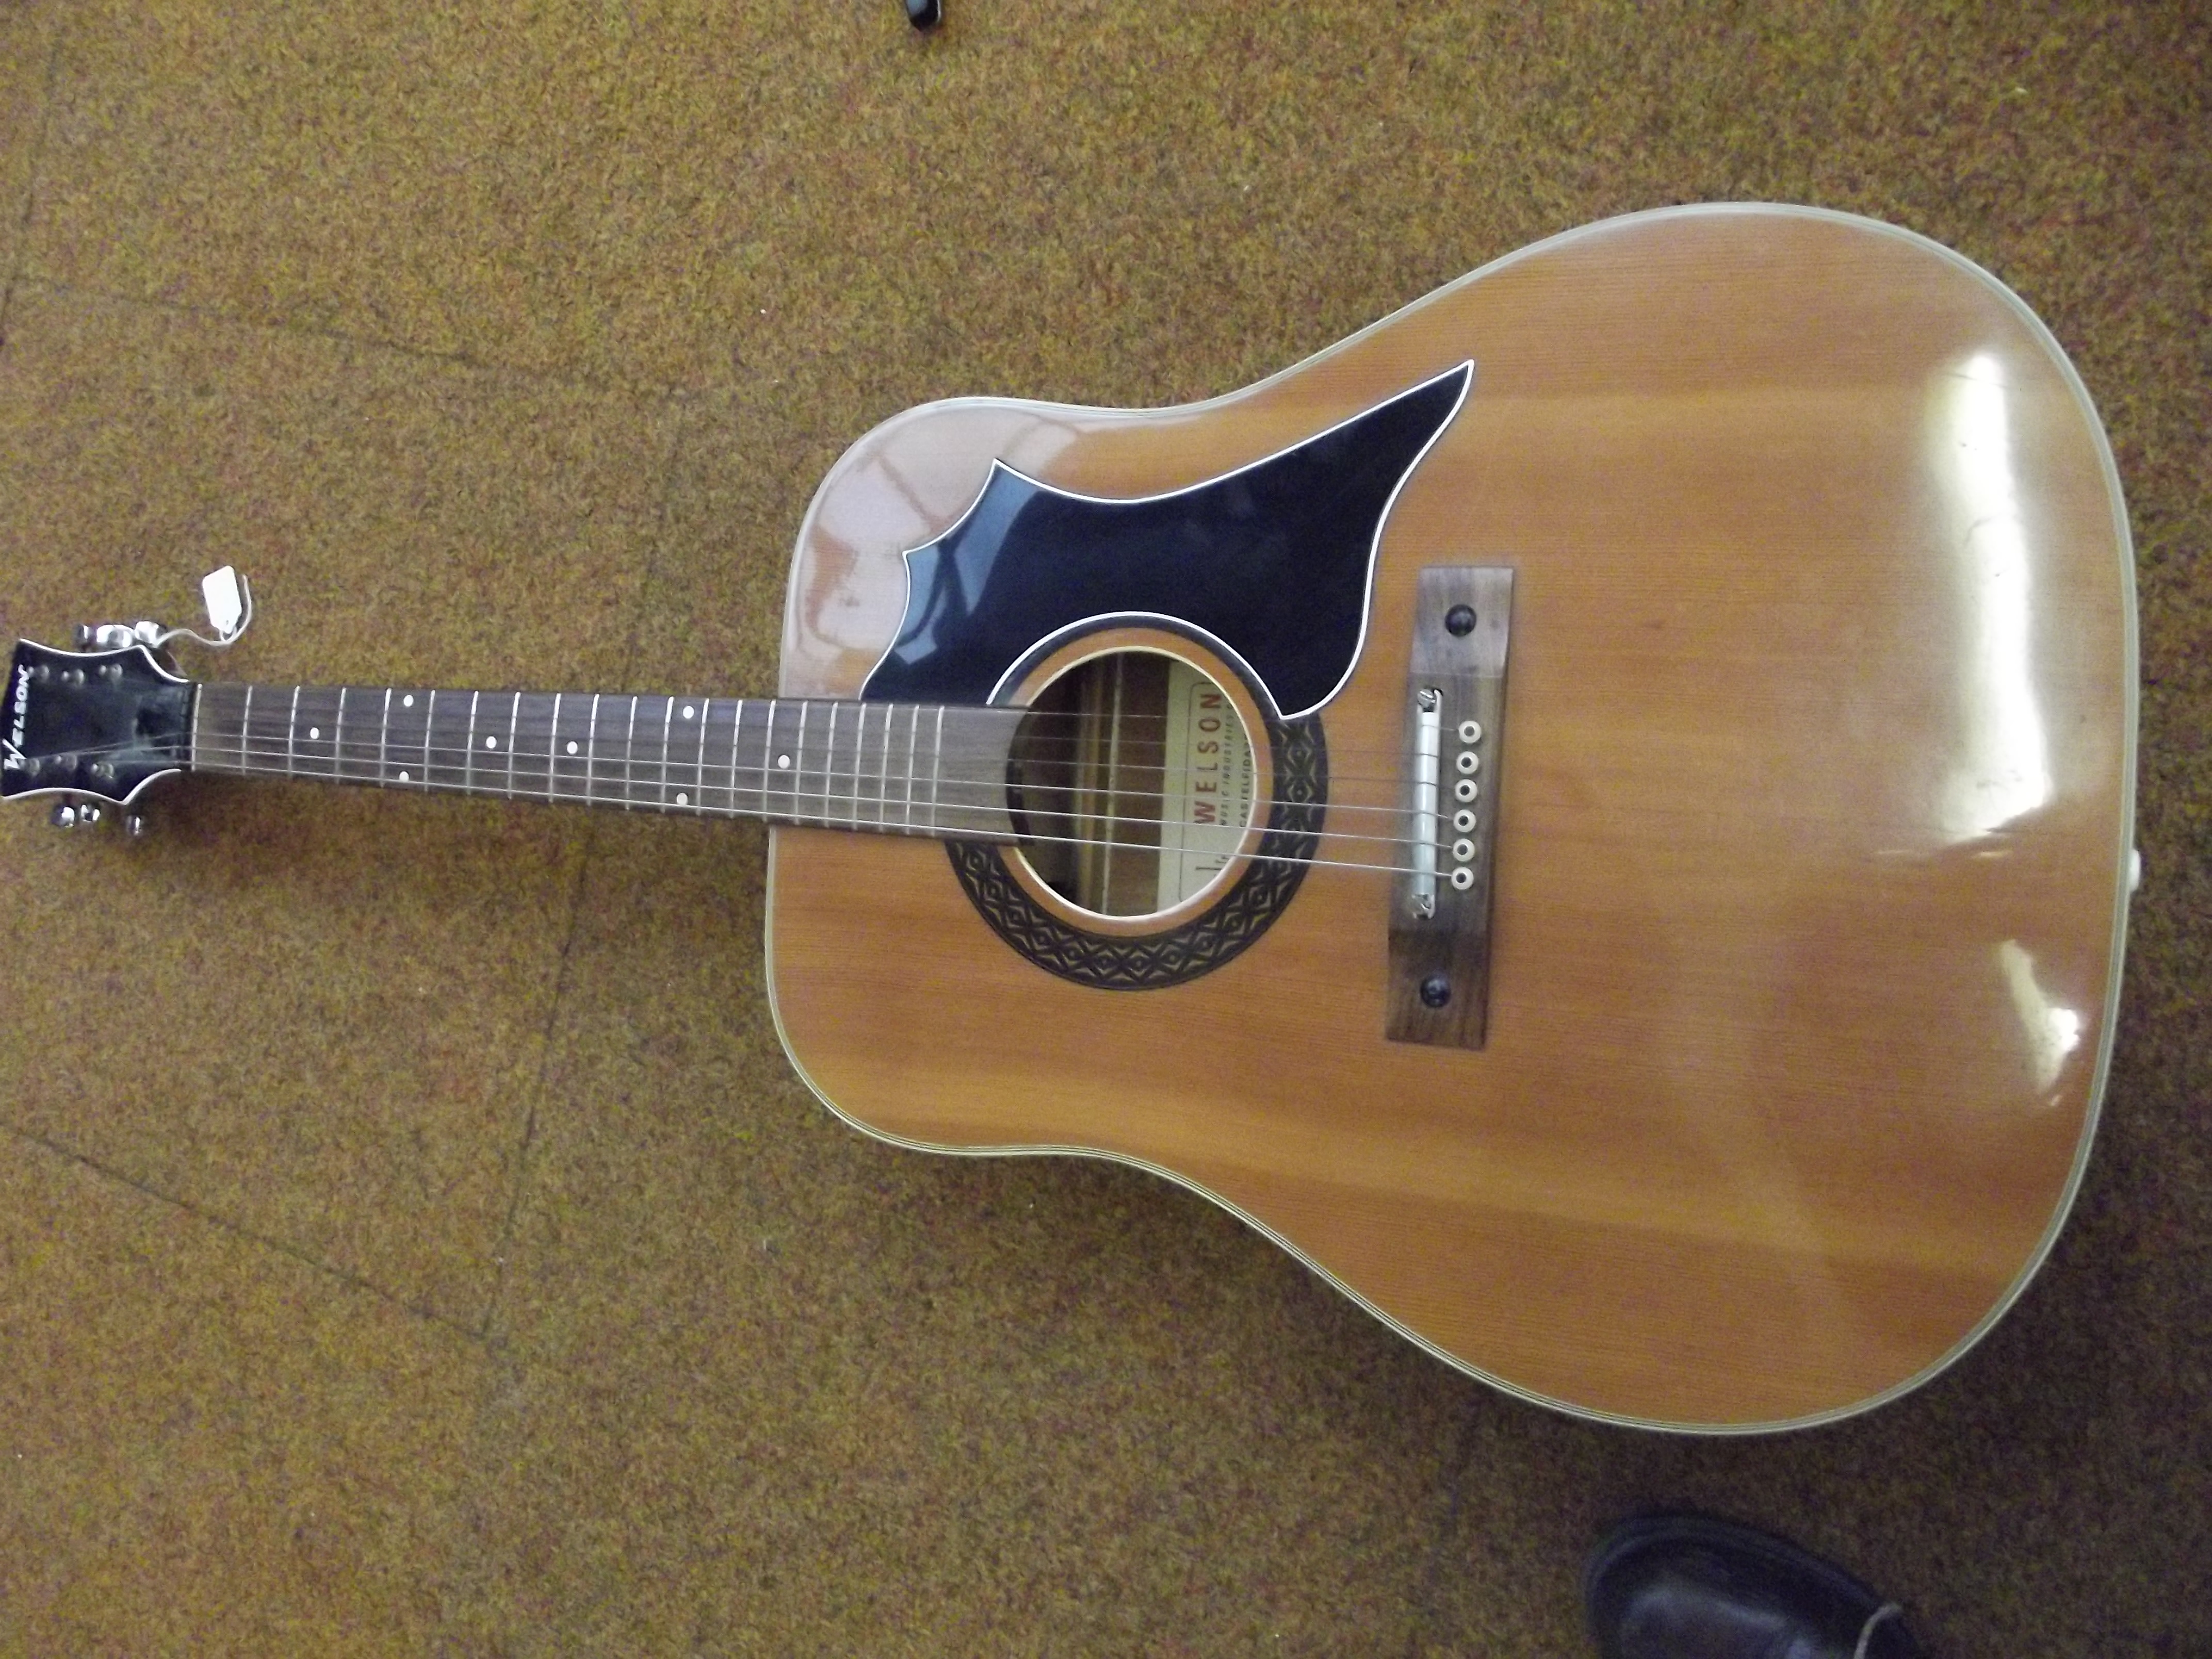 Welson acoustic guitar